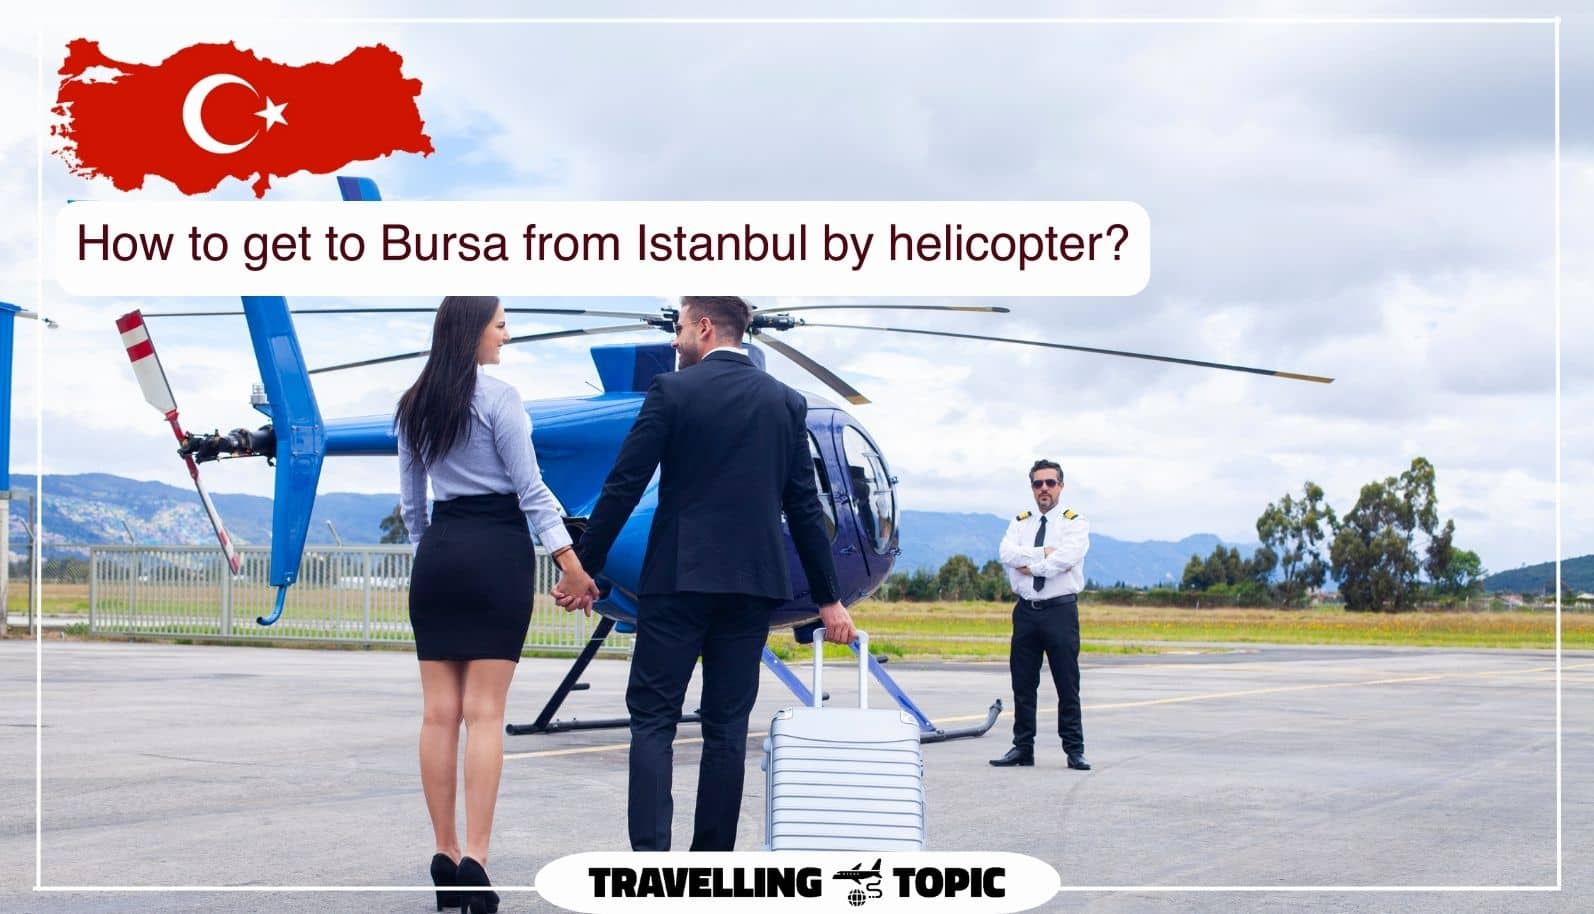 How to get to Bursa from Istanbul by helicopter